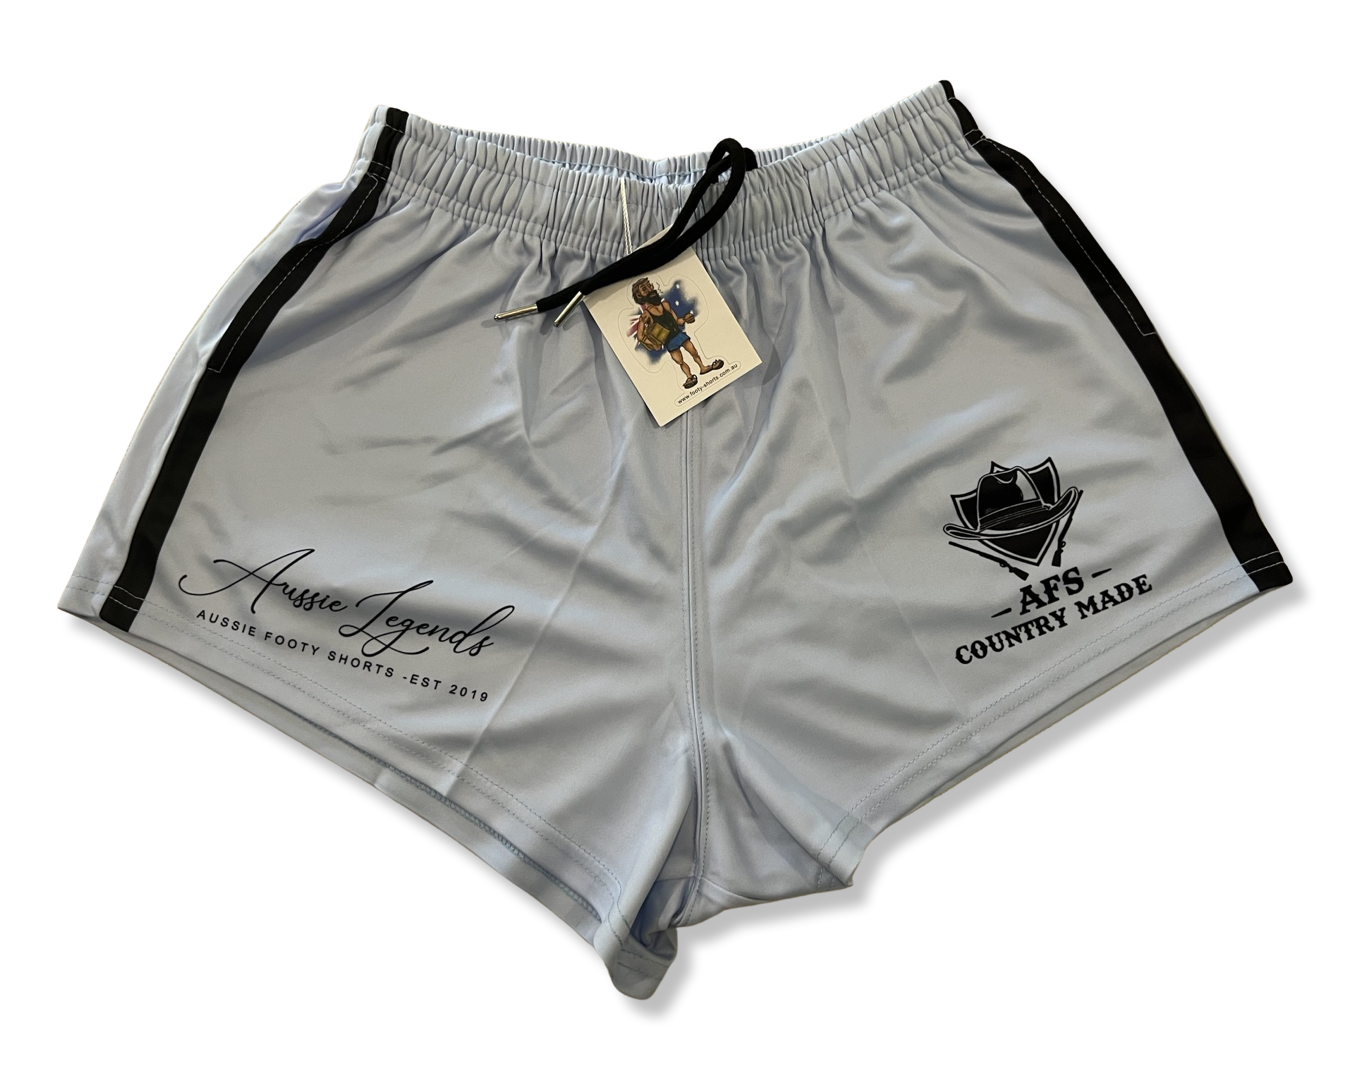 Country Made-  Footy Shorts (With Pockets) LIGHT BLUE!